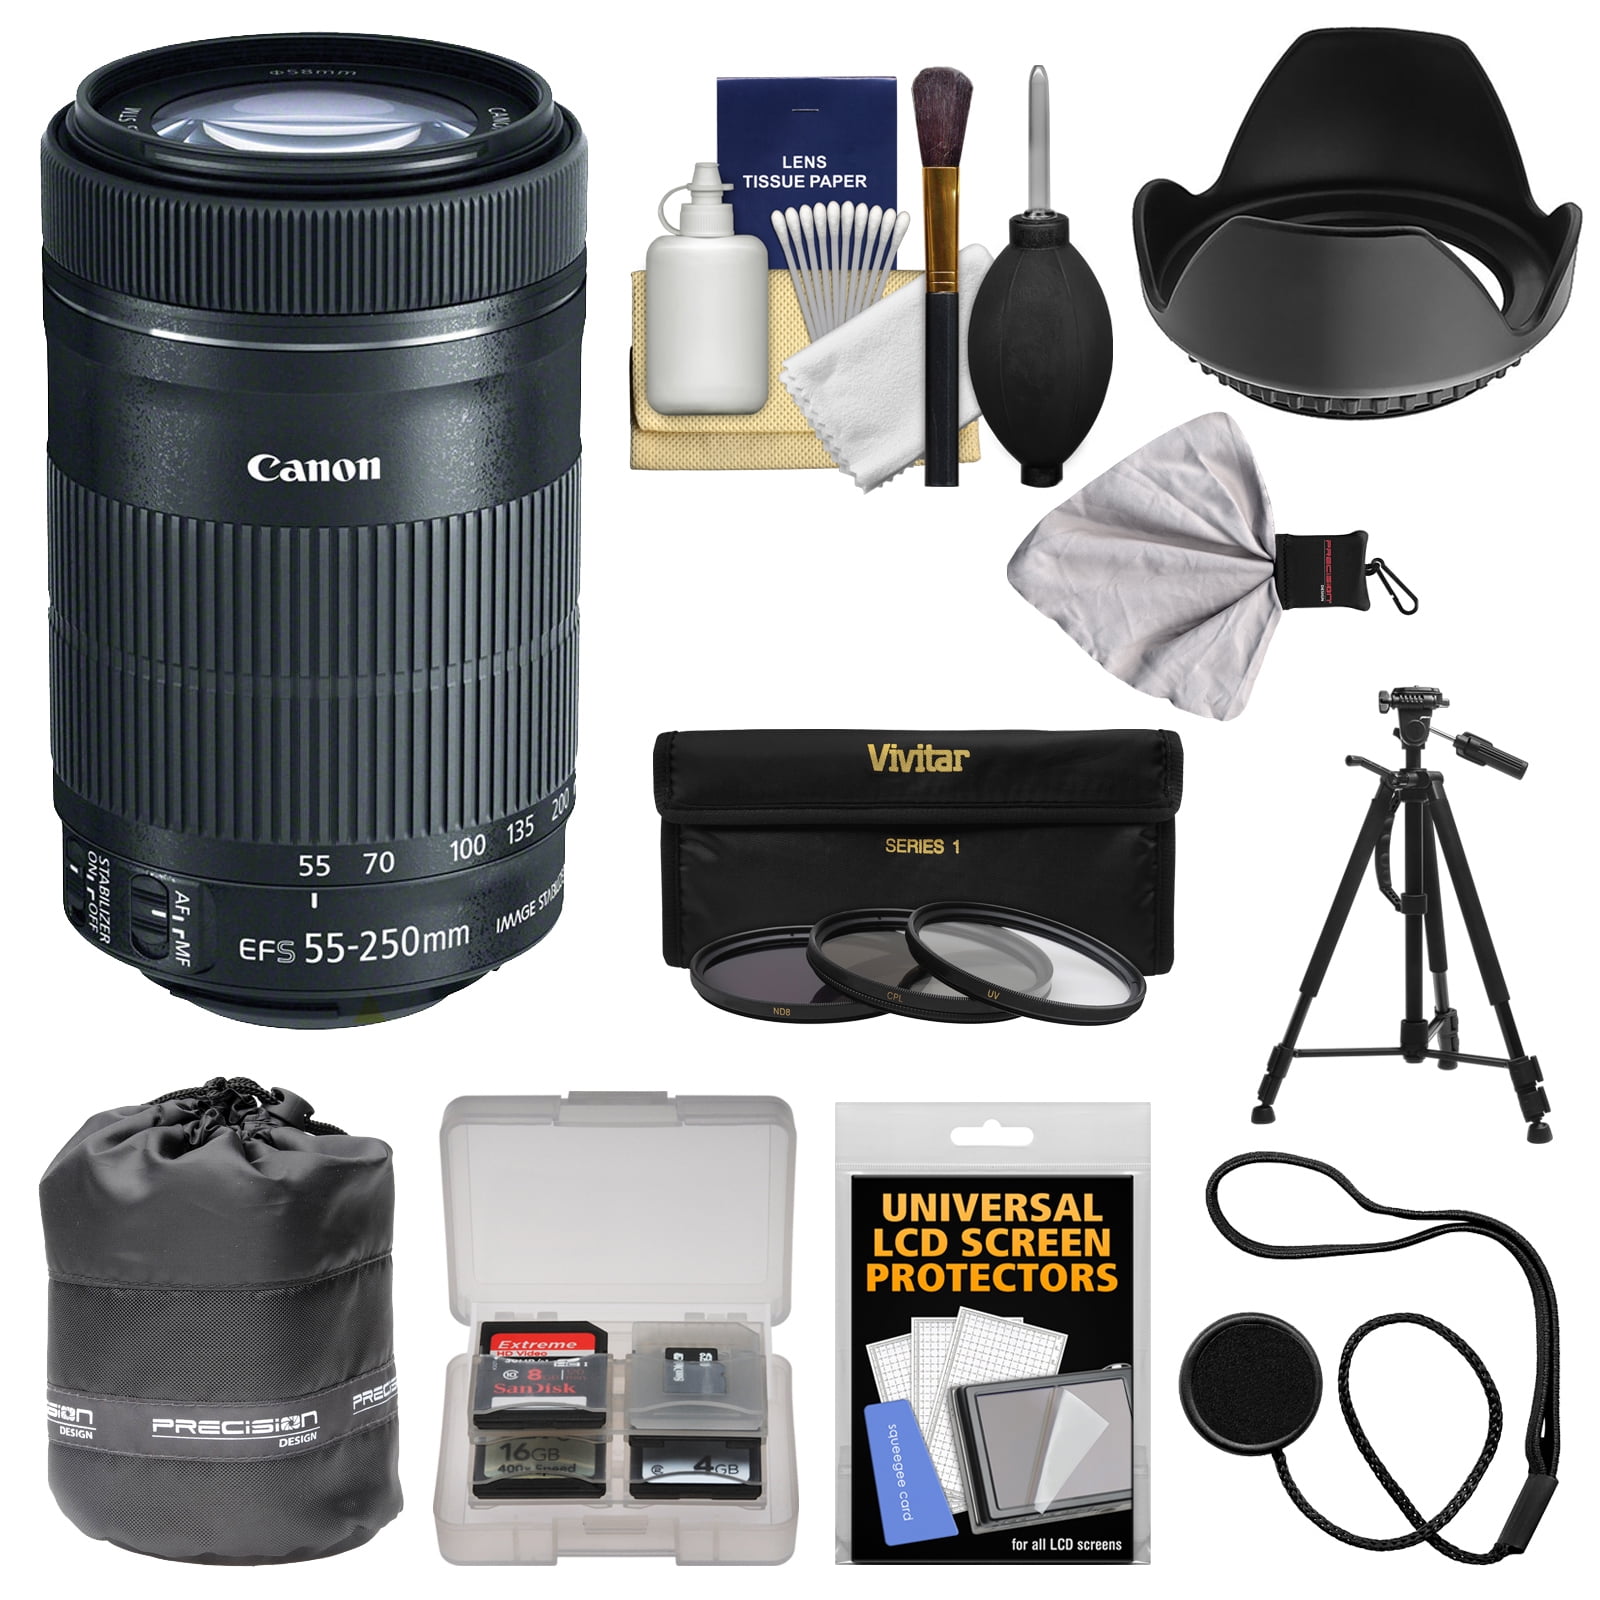 Canon EF-S 55-250mm f/4-5.6 IS STM Lens Zoom Lens with Tripod 3